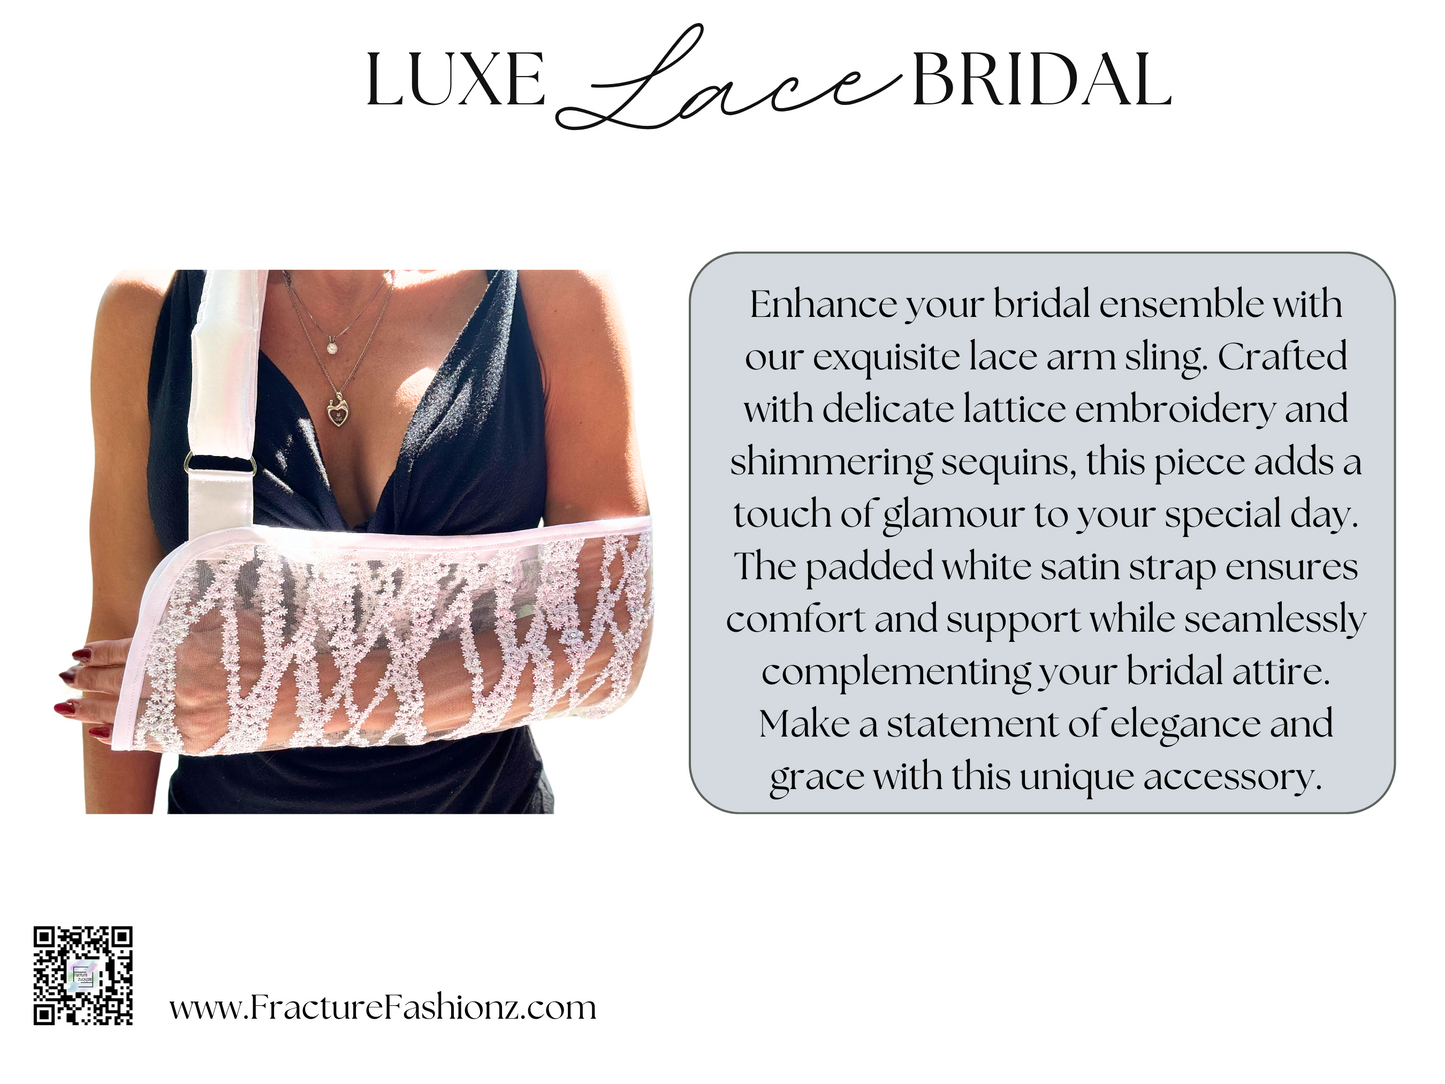 Luxe Lace Bridal Arm Sling